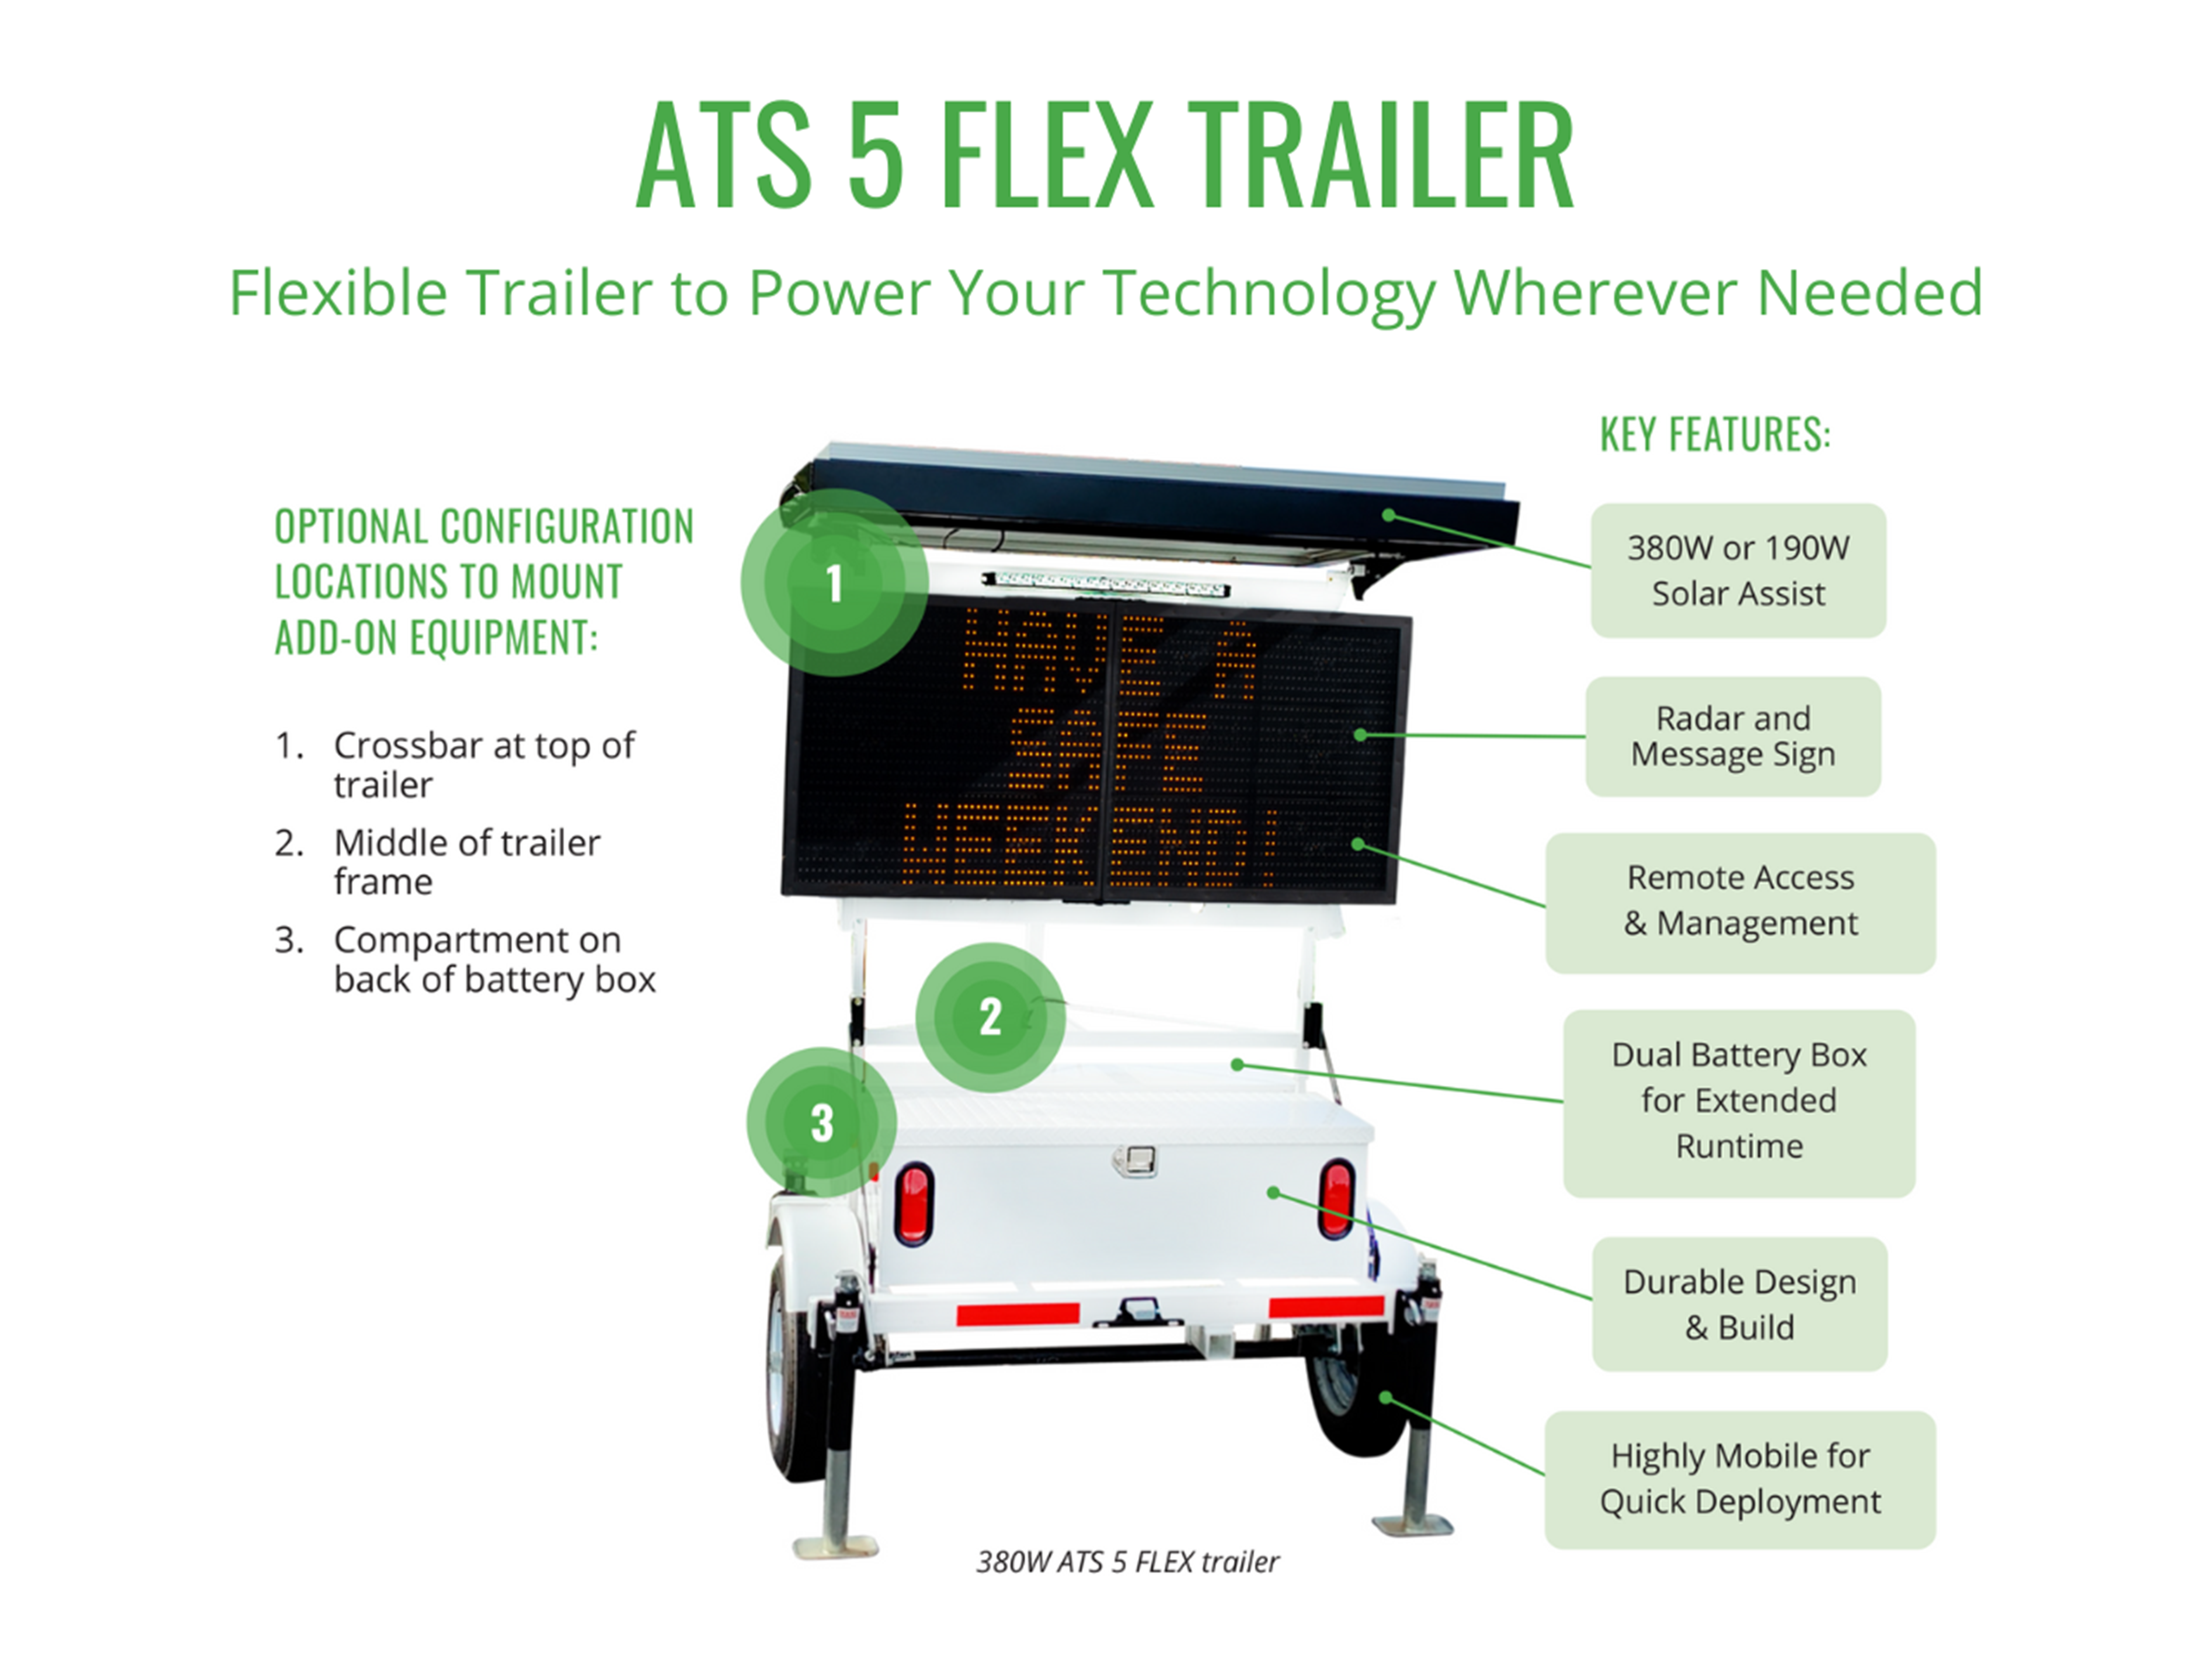 Highlighting the ATS 5 FLEX mobile trailer features